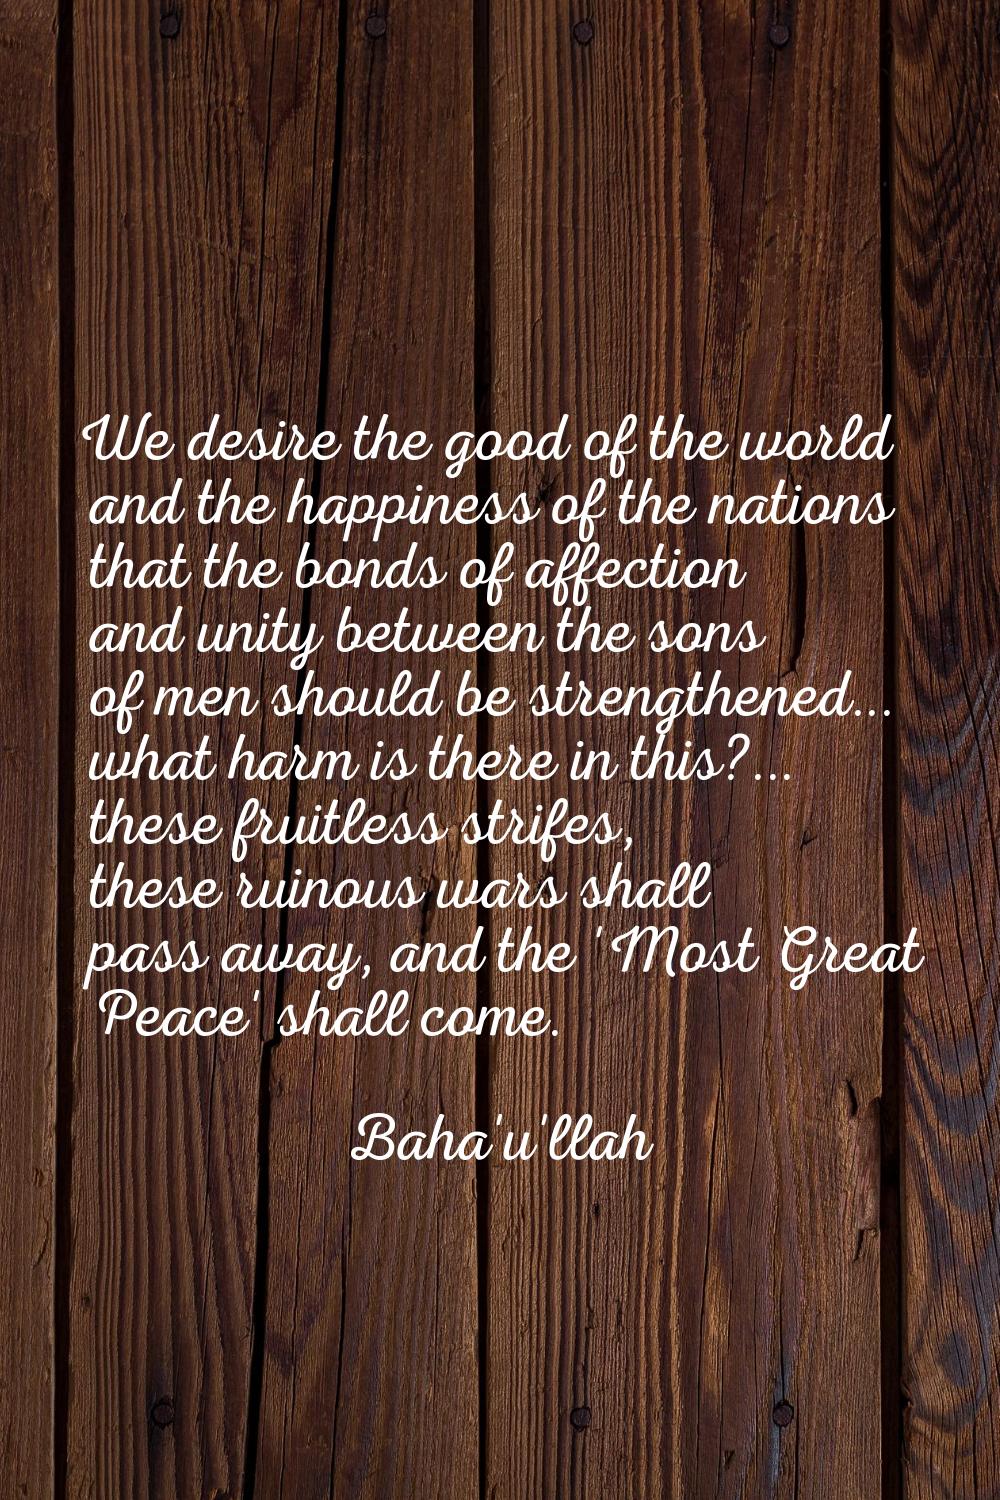 We desire the good of the world and the happiness of the nations that the bonds of affection and un